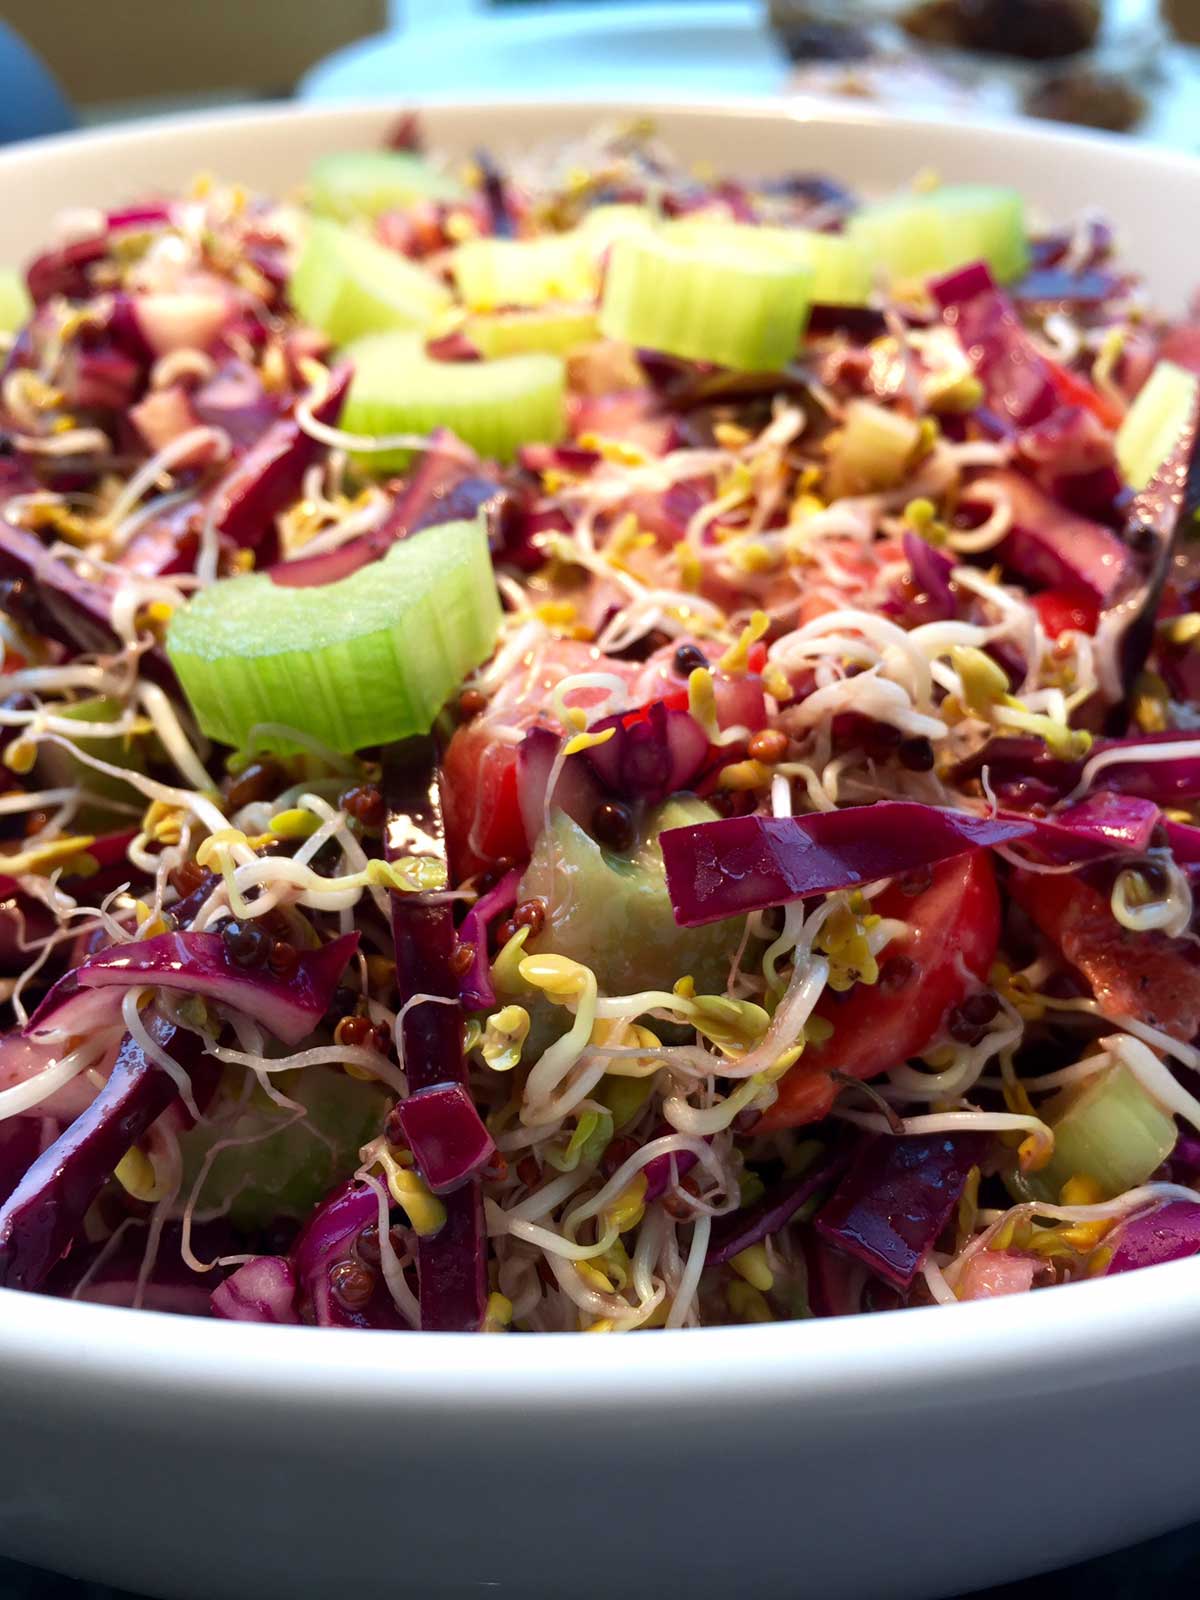 Broccoli sprouts and red cabbage